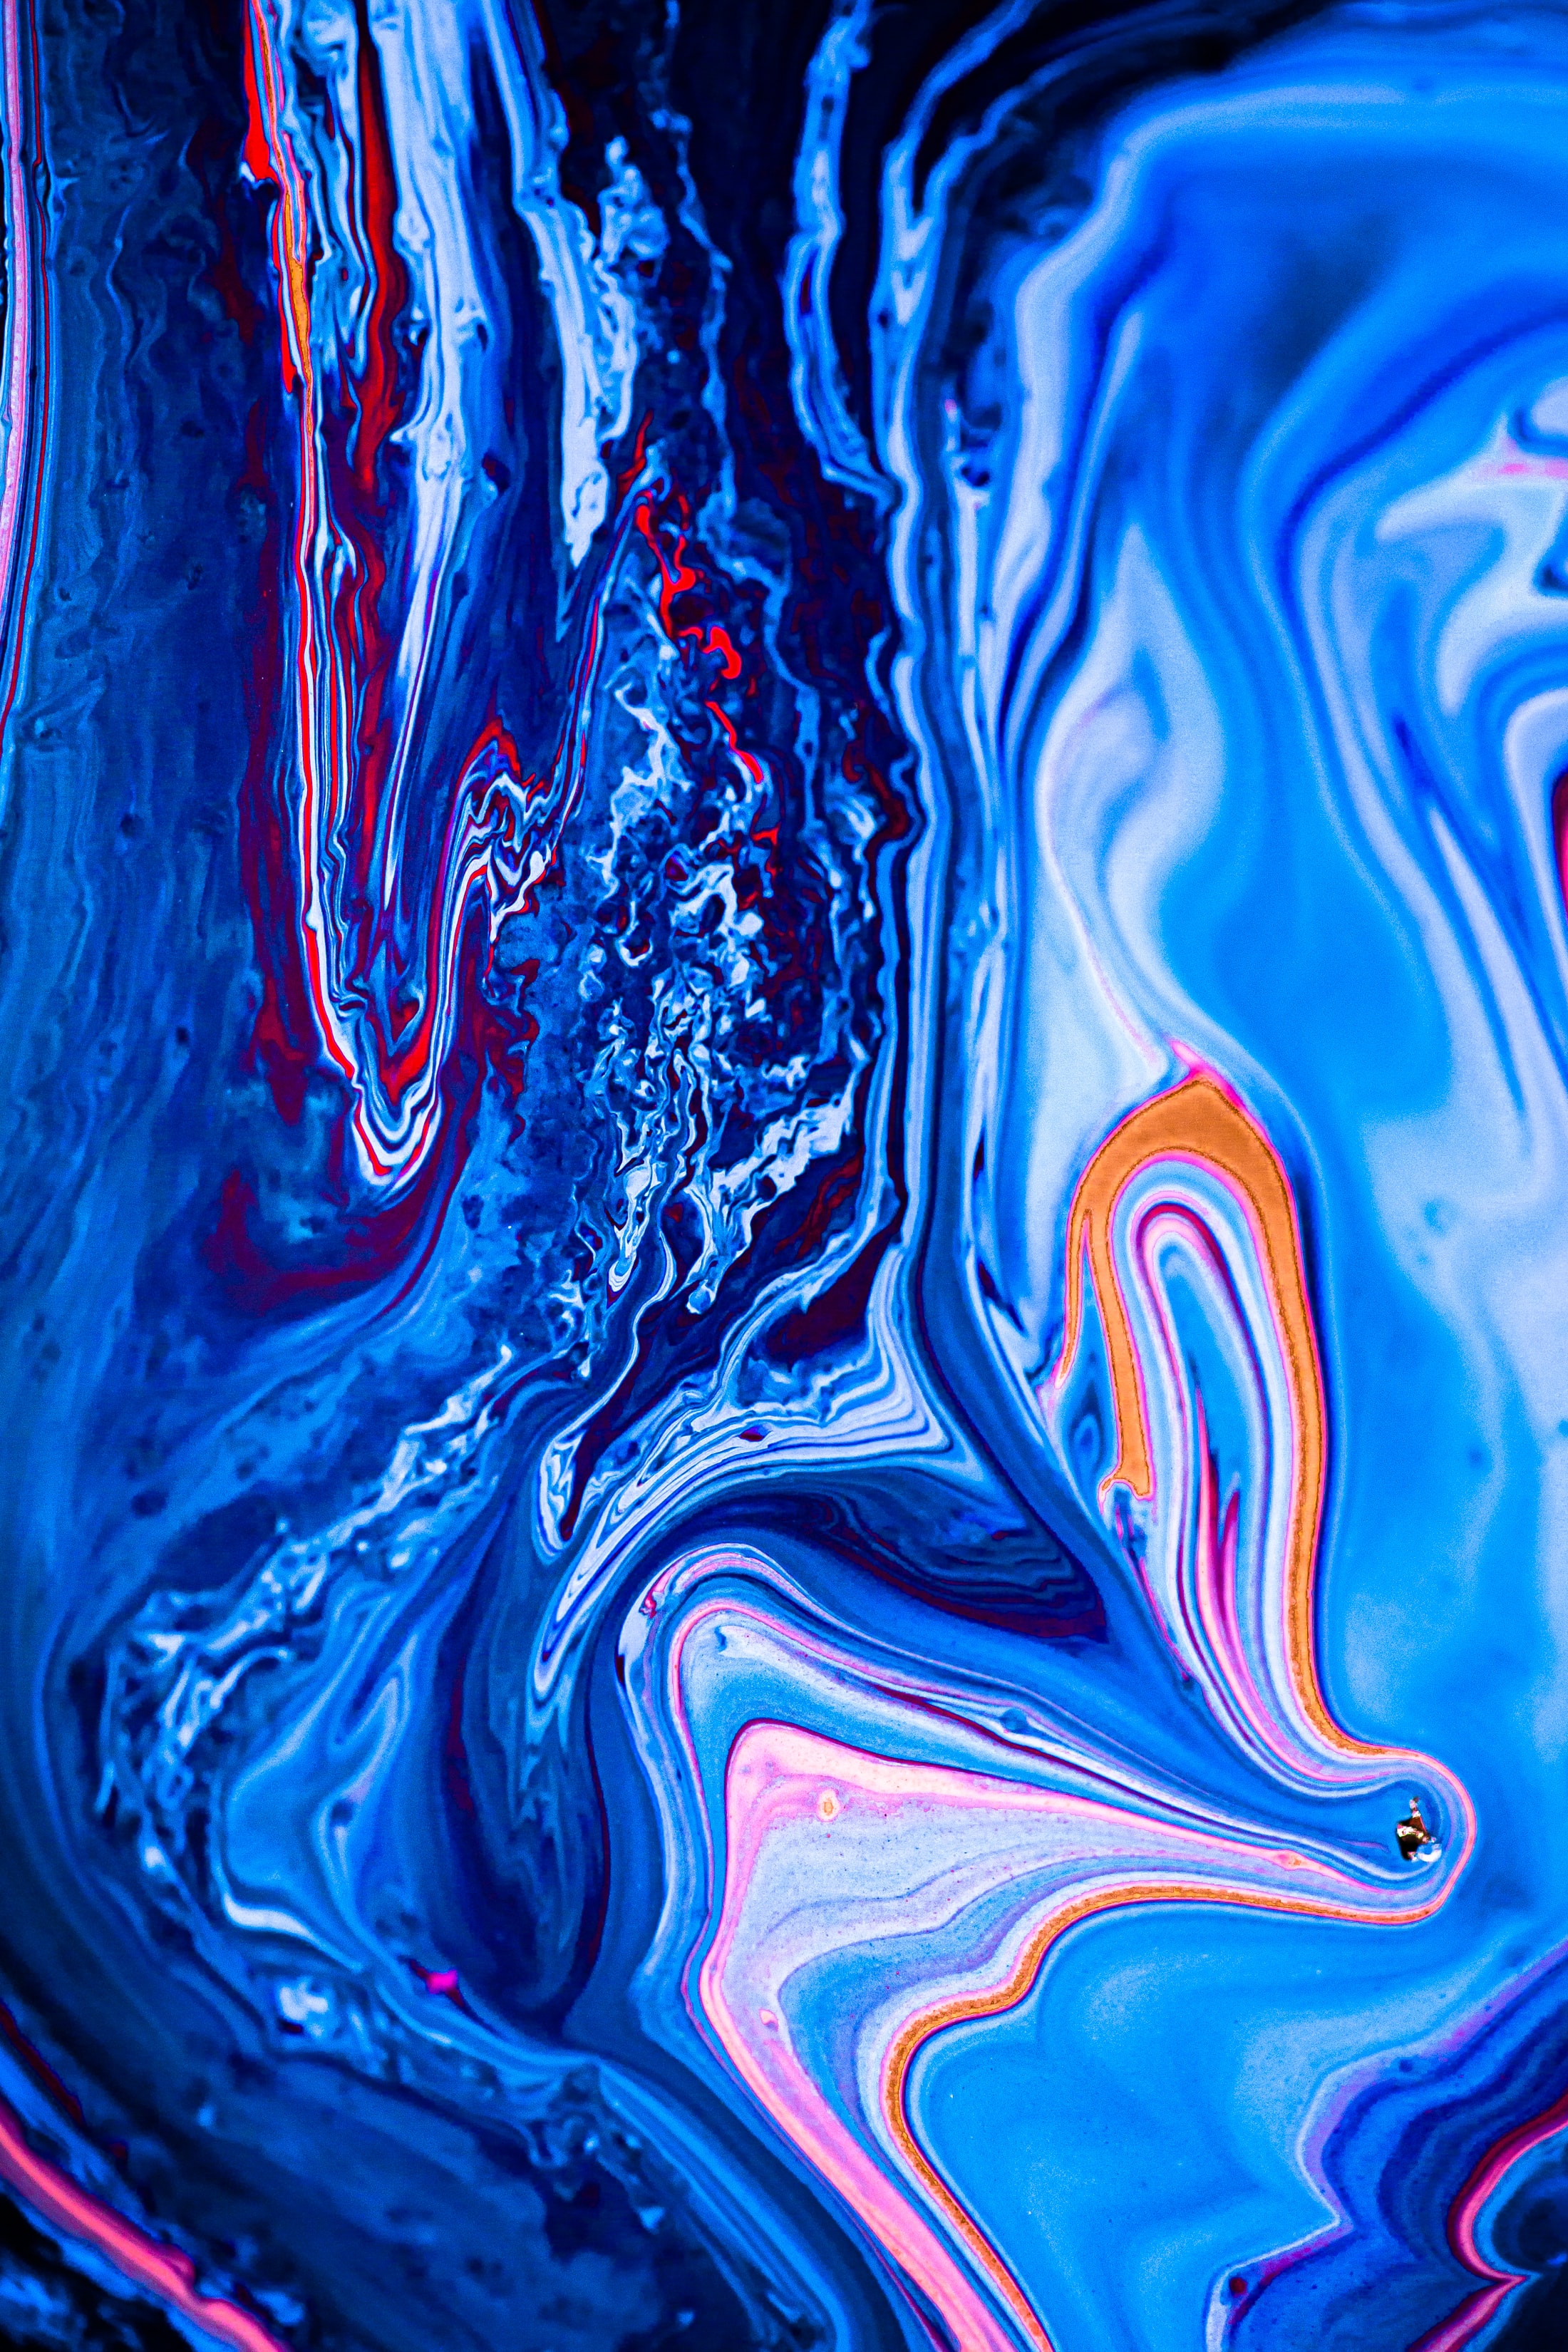 102681 download wallpaper blue, paint, abstract, art, divorces, liquid, fluid art screensavers and pictures for free